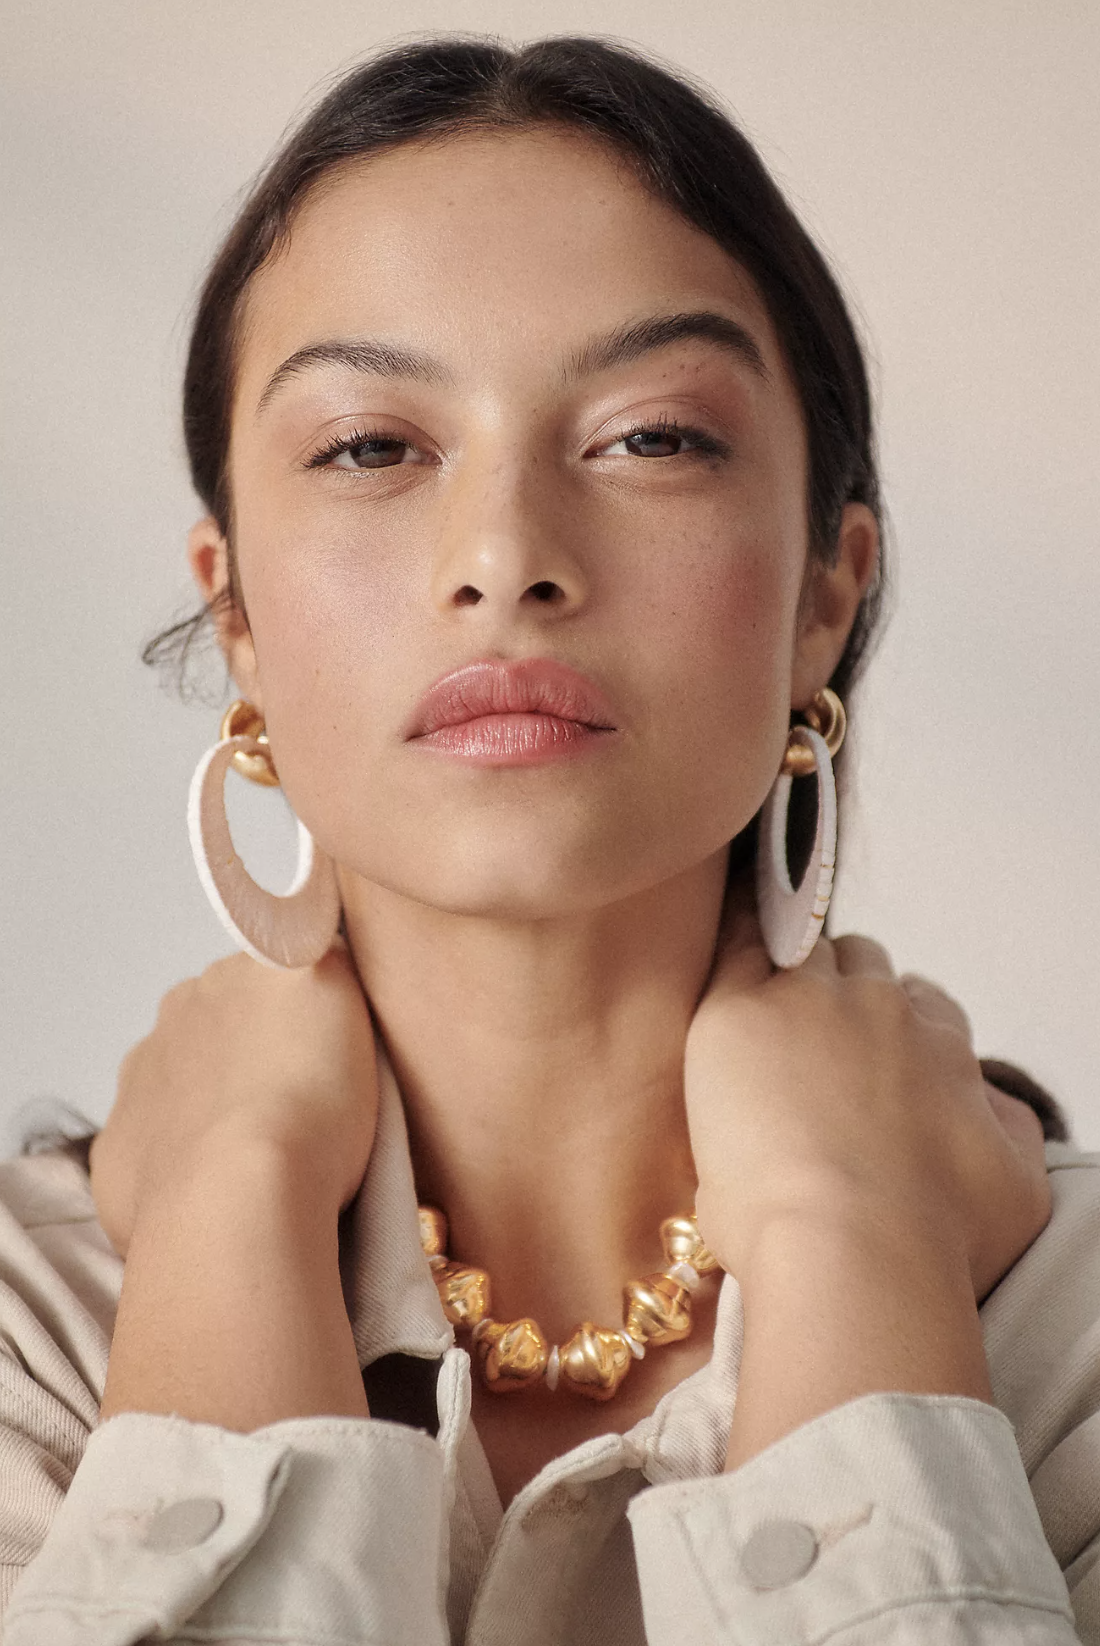 chunky jewelry is back for spring 2023